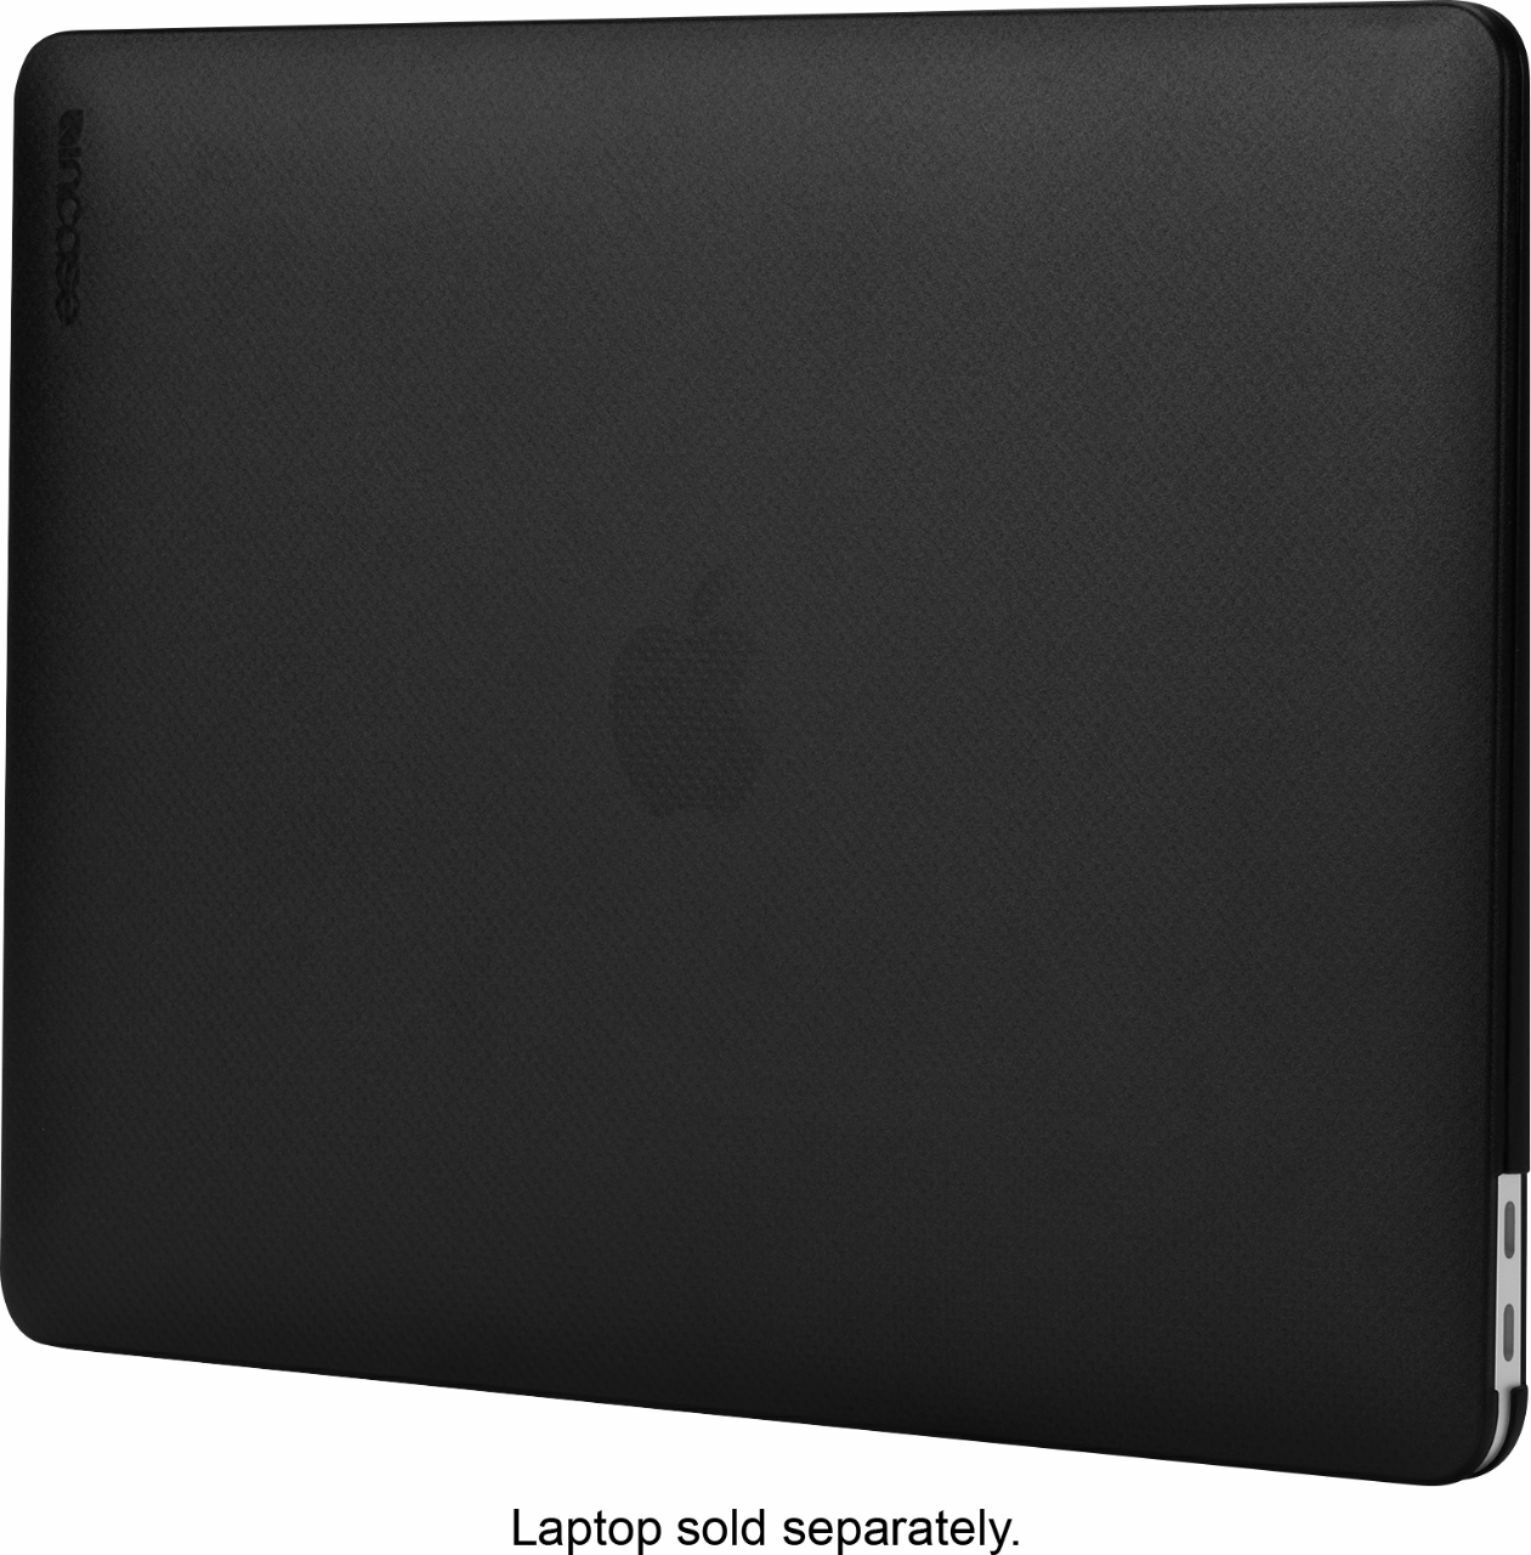 Incase - Hardshell Dot Case for the 2020 and M1 2020 13" MacBook Air - Black